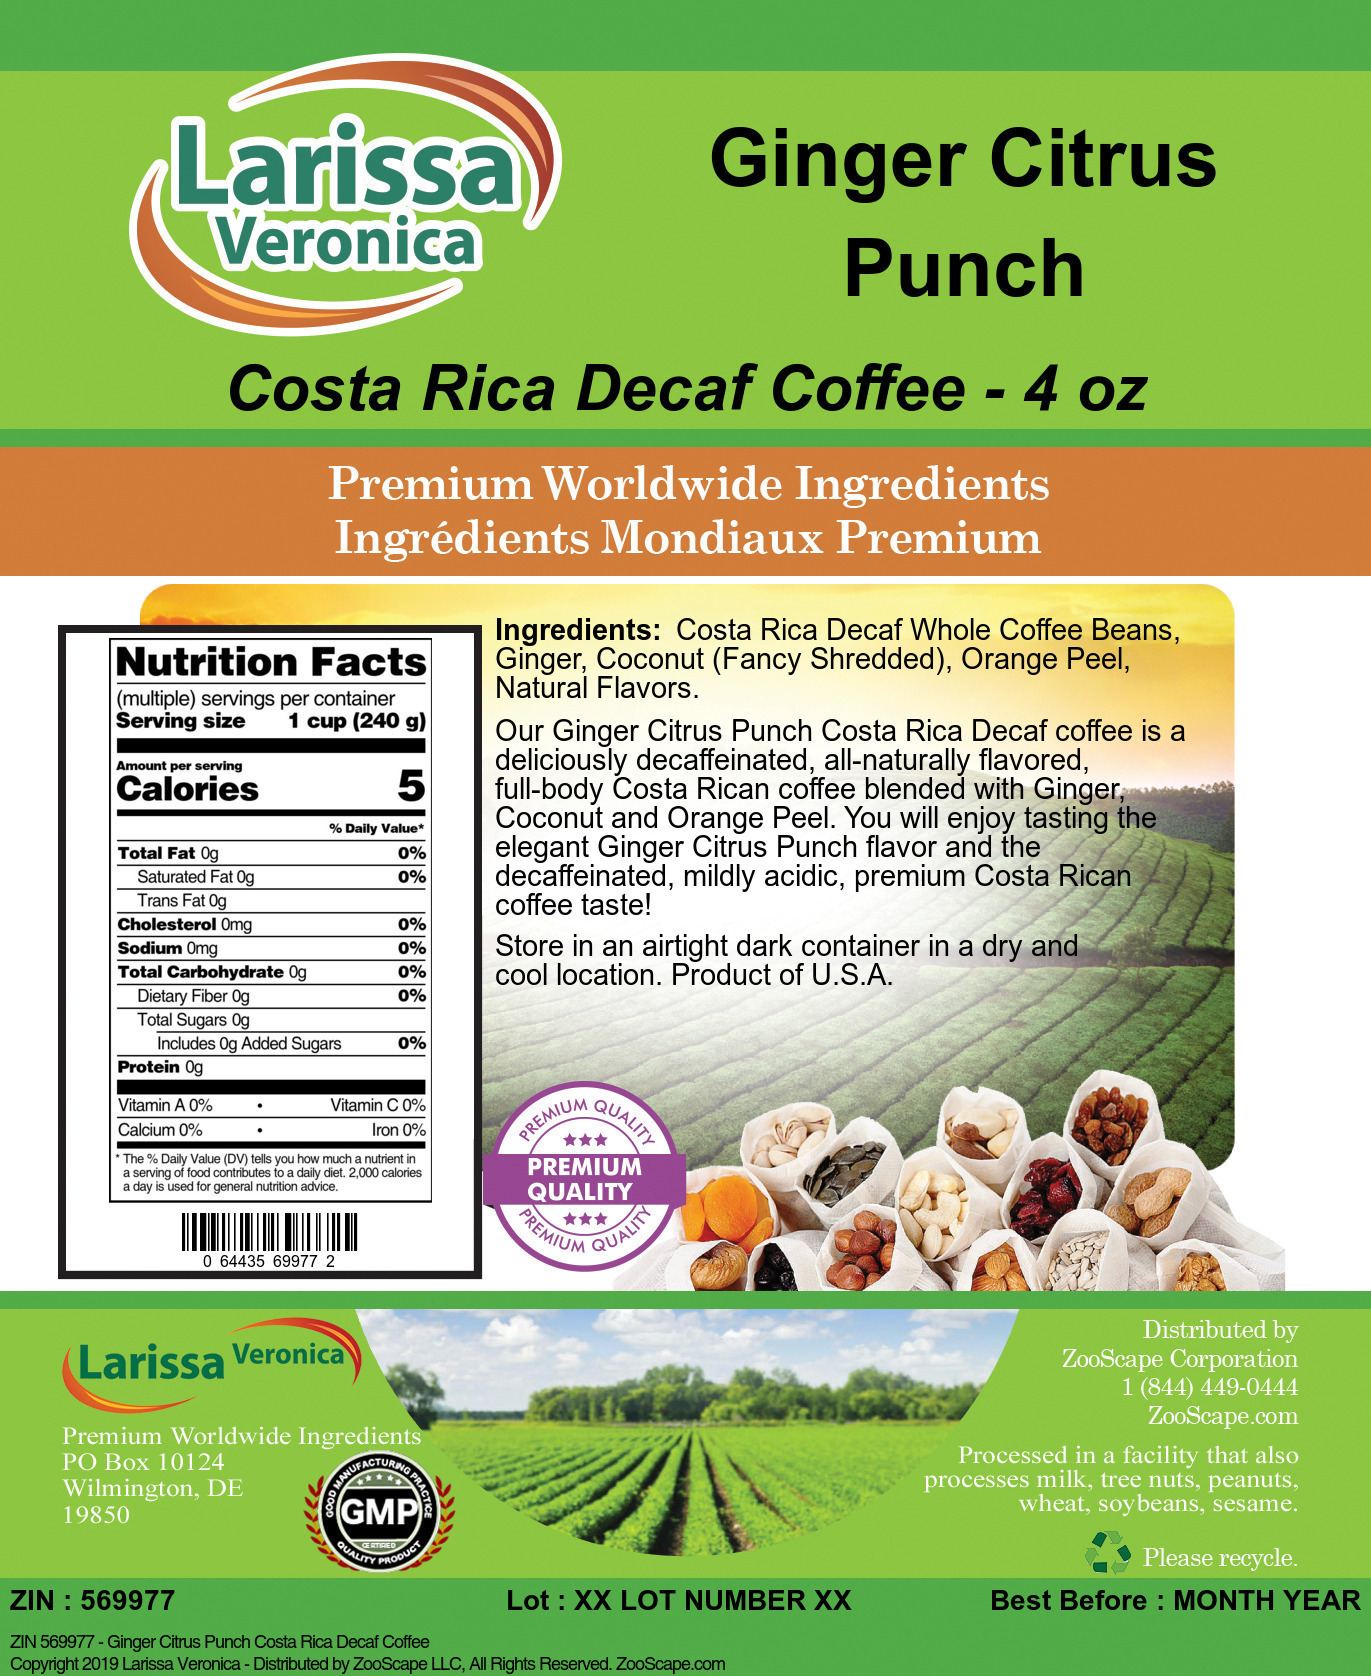 Ginger Citrus Punch Costa Rica Decaf Coffee - Label